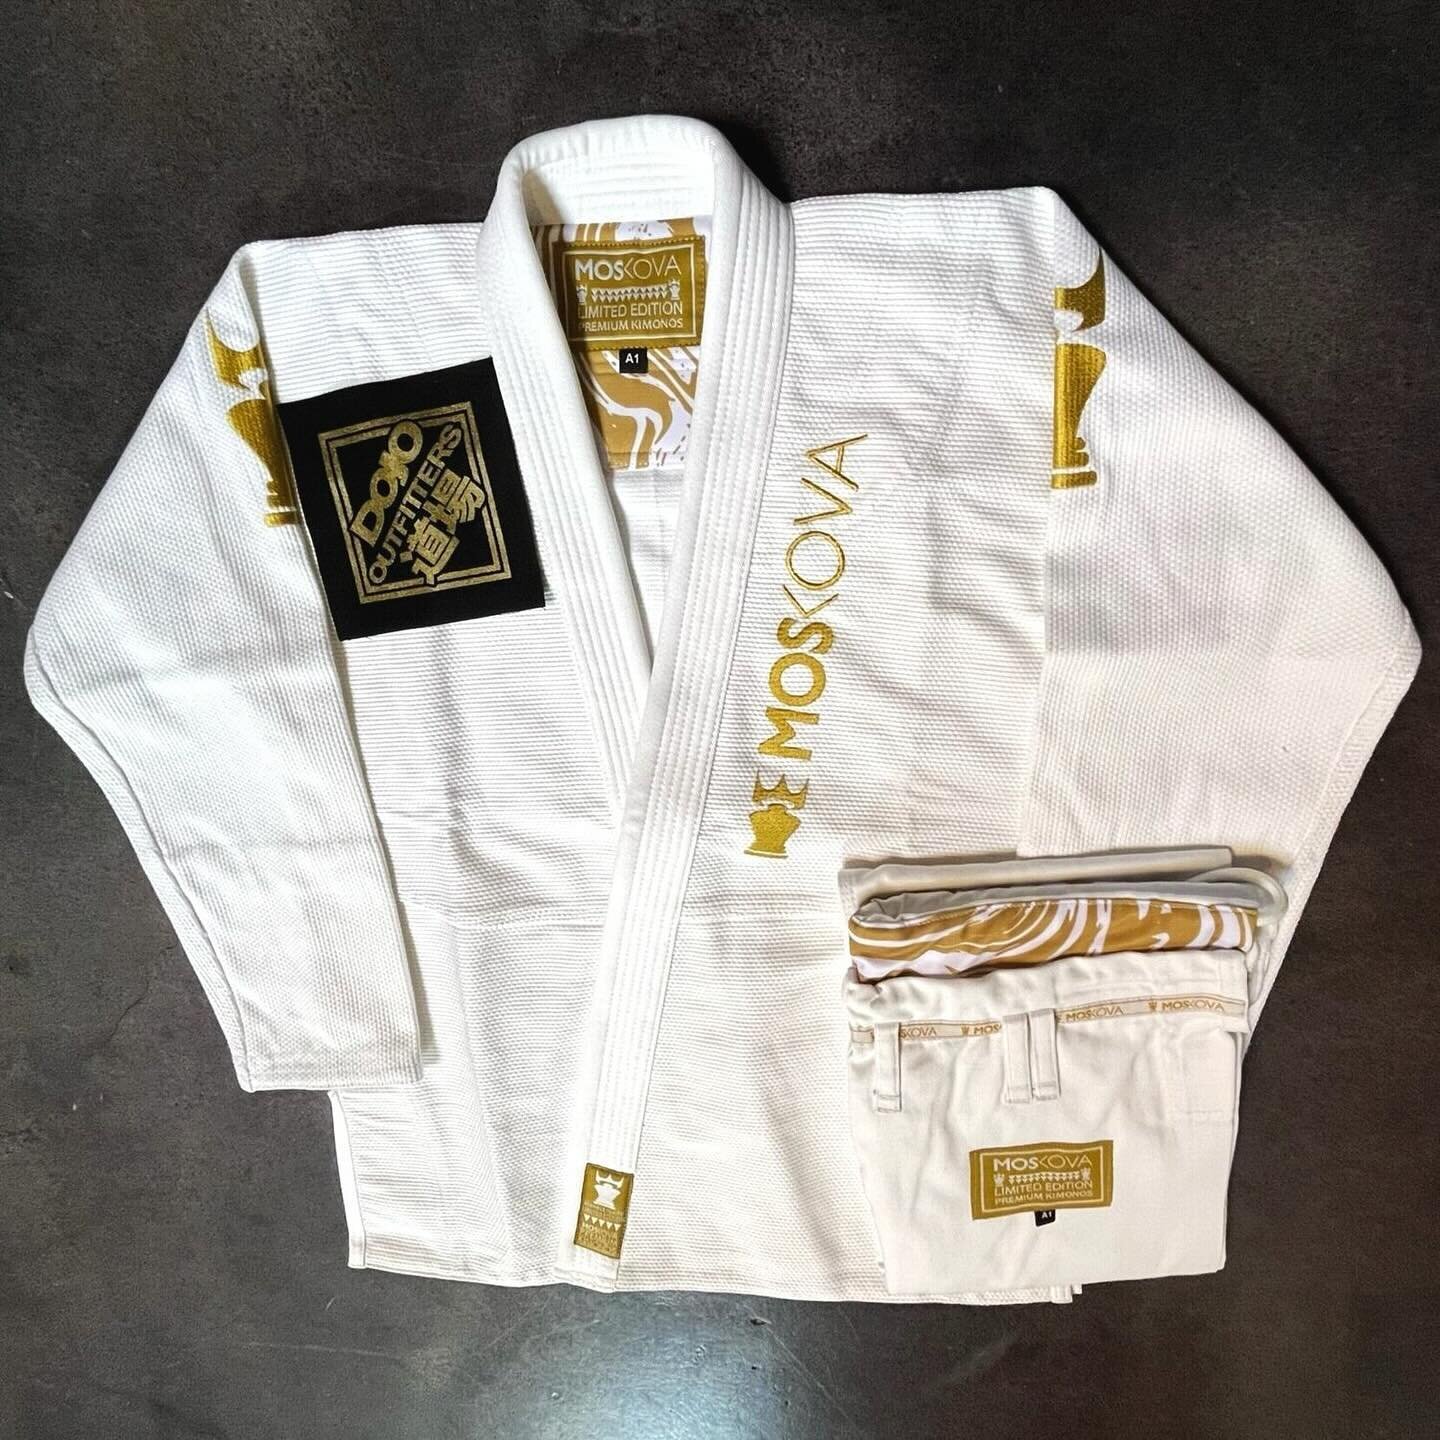 A lycra lined 450gsm jacket combined with 10oz cotton twill pants, this gi is approved for IBJJF competitions. A limited offering from @moskova and dripping in Gold.
.
⚡️ All his in the Dojo Gi Vault are brand new! Check out the wide selection.